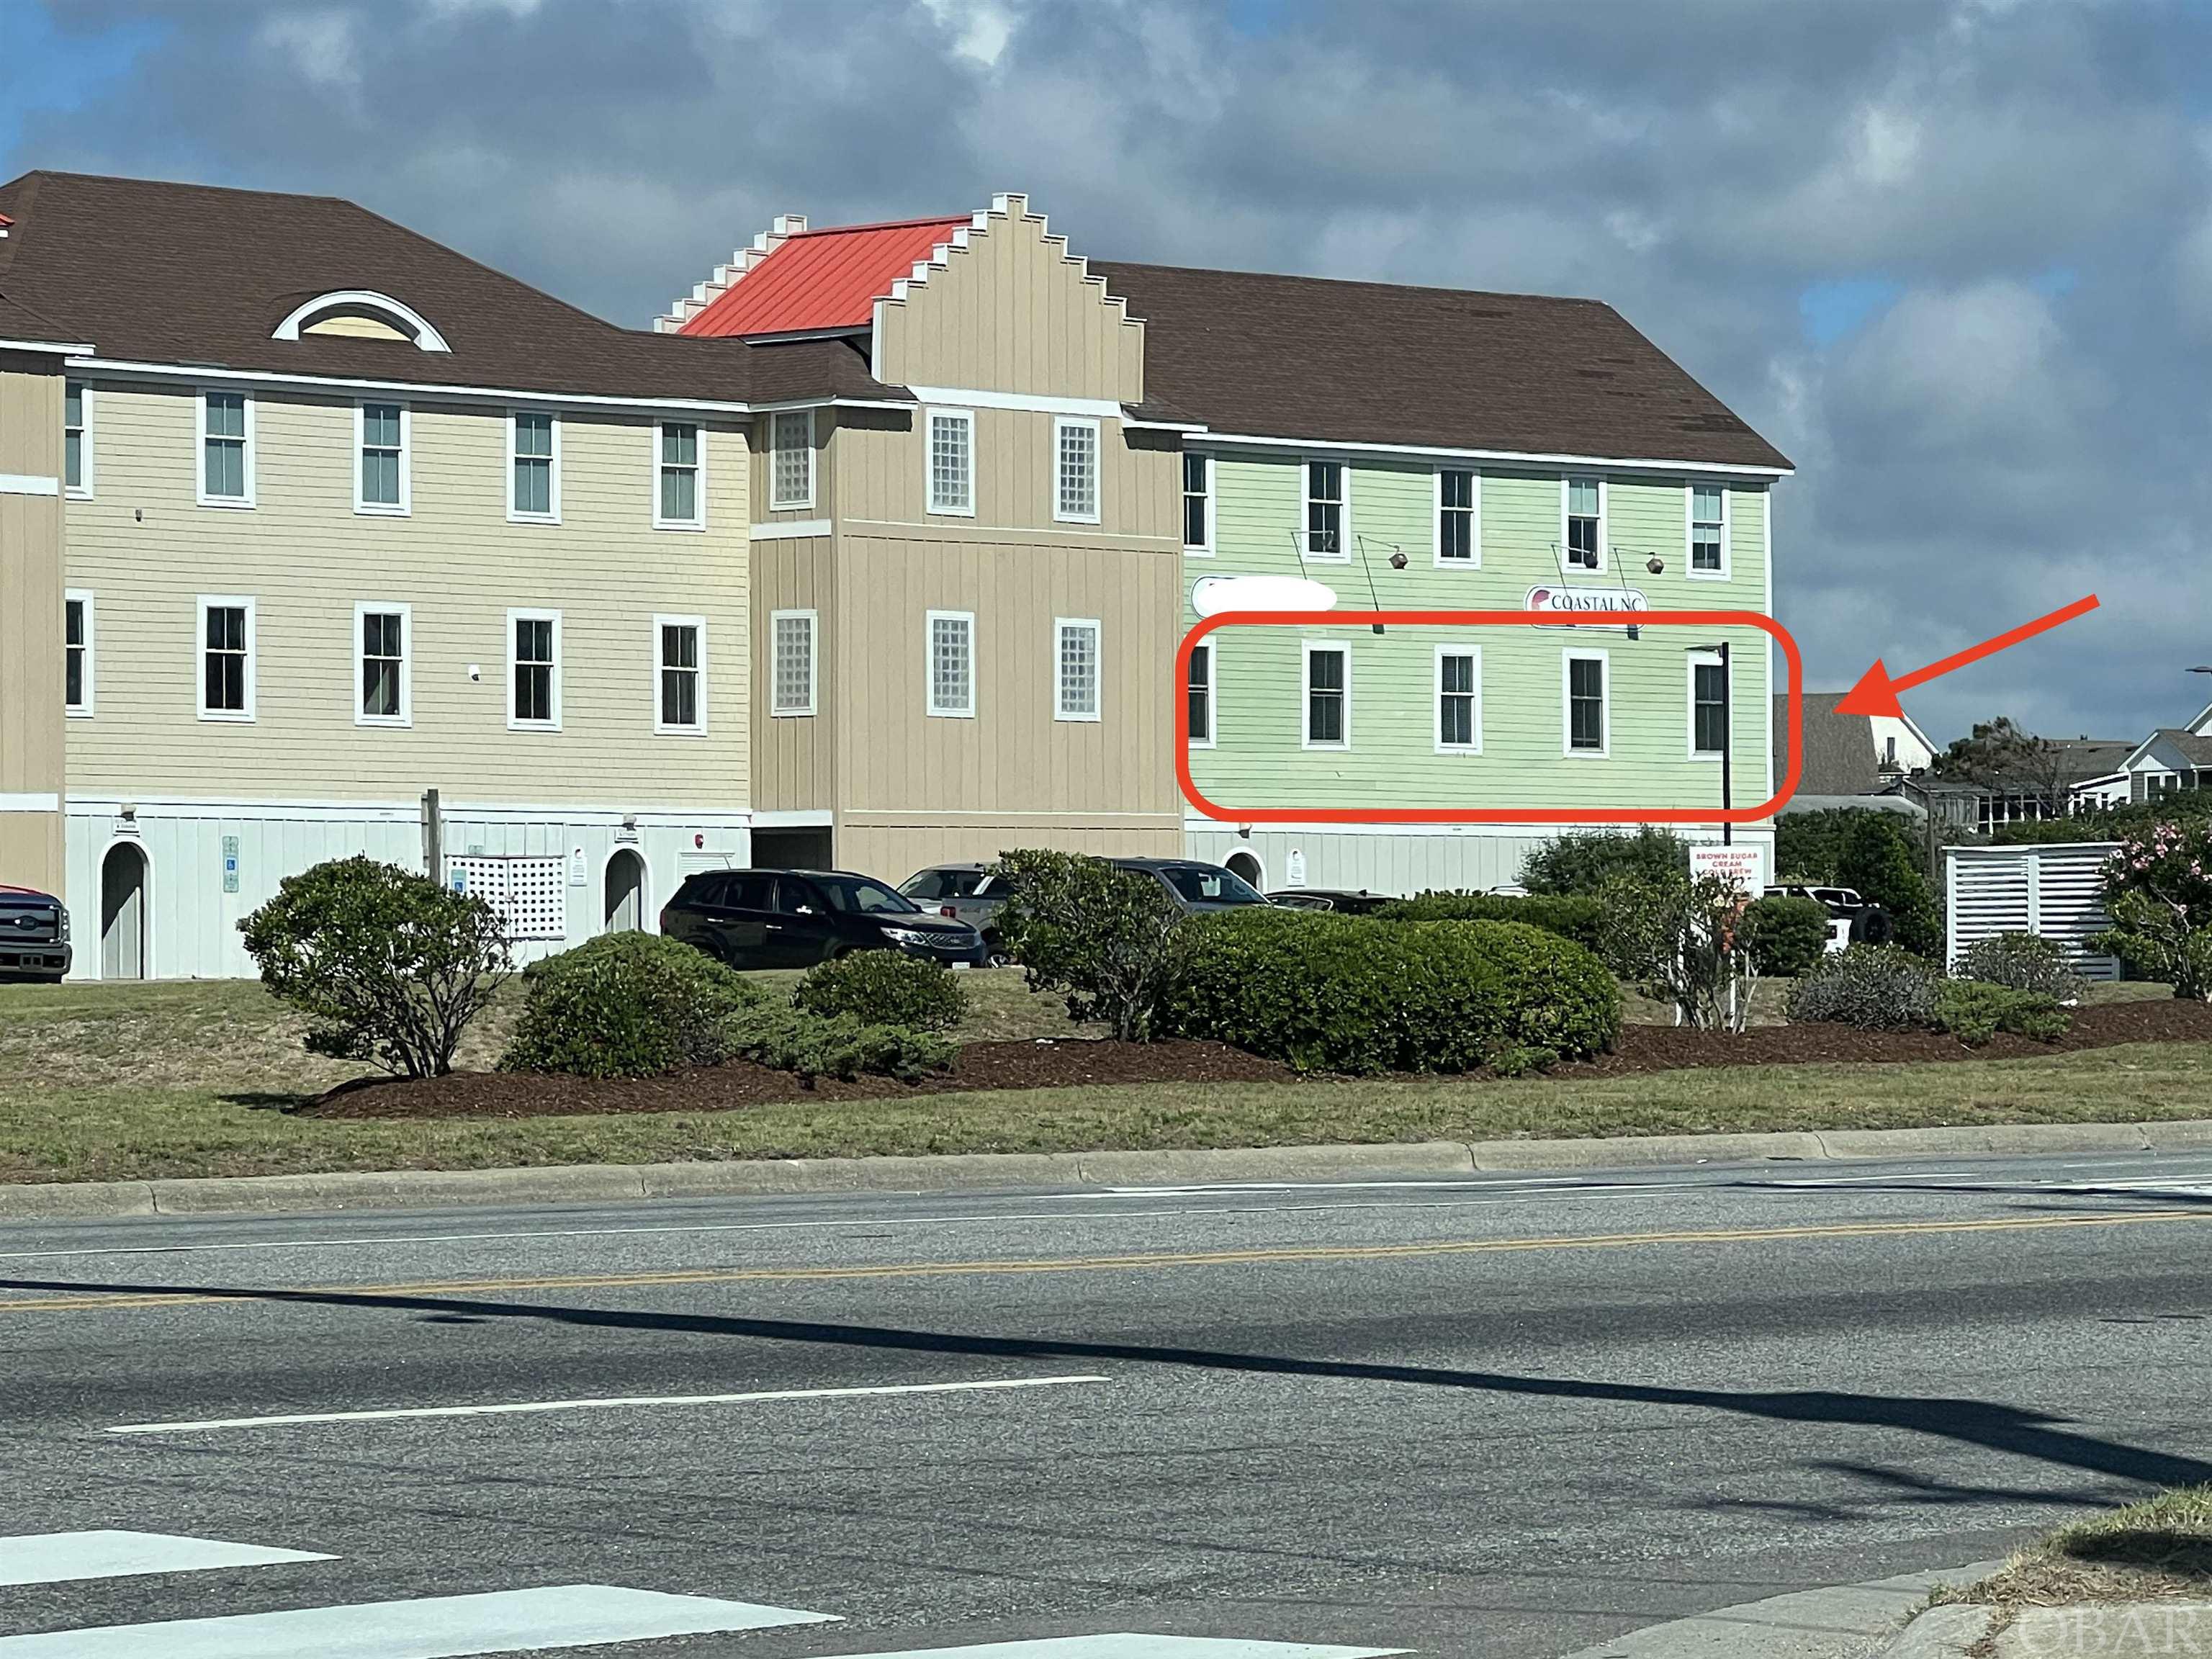 Great opportunity for highly visible commercial condo right in the heart of the OBX. Unit consists of reception area, 4 offices, kitchen, restroom,  and storage area. New LVT flooring and paint within the past 5 years. Elevator access as well as stairs. Highly visible from 158 Bypass. Also included is 1 bay garage on N side of building.